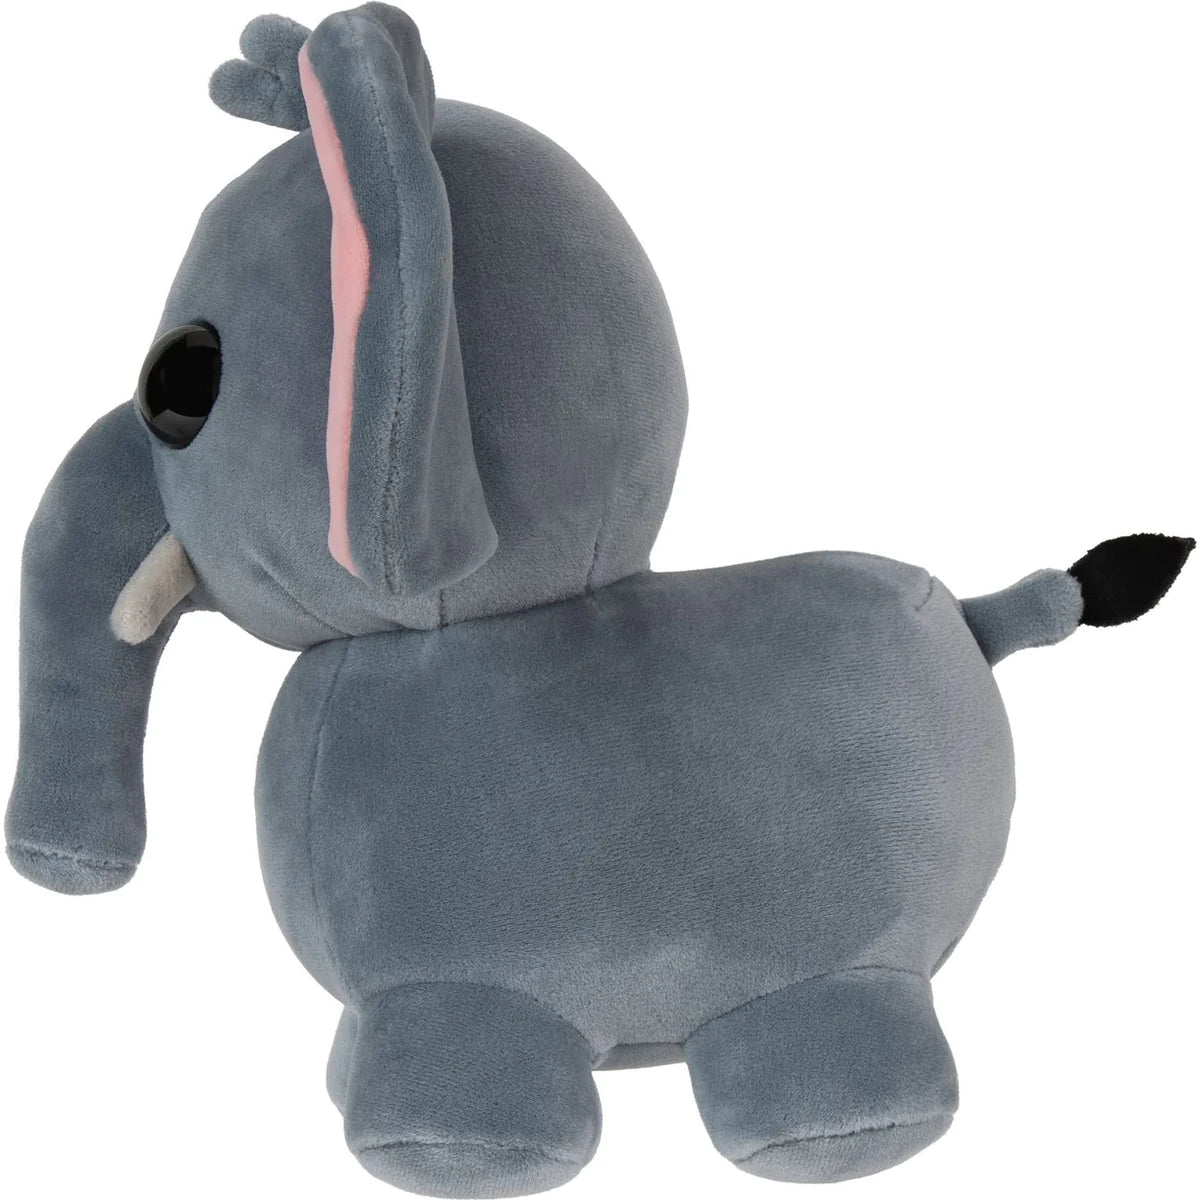 Adopt Me Series 2 Elephant 8 Inch Collector Plush Soft Toy